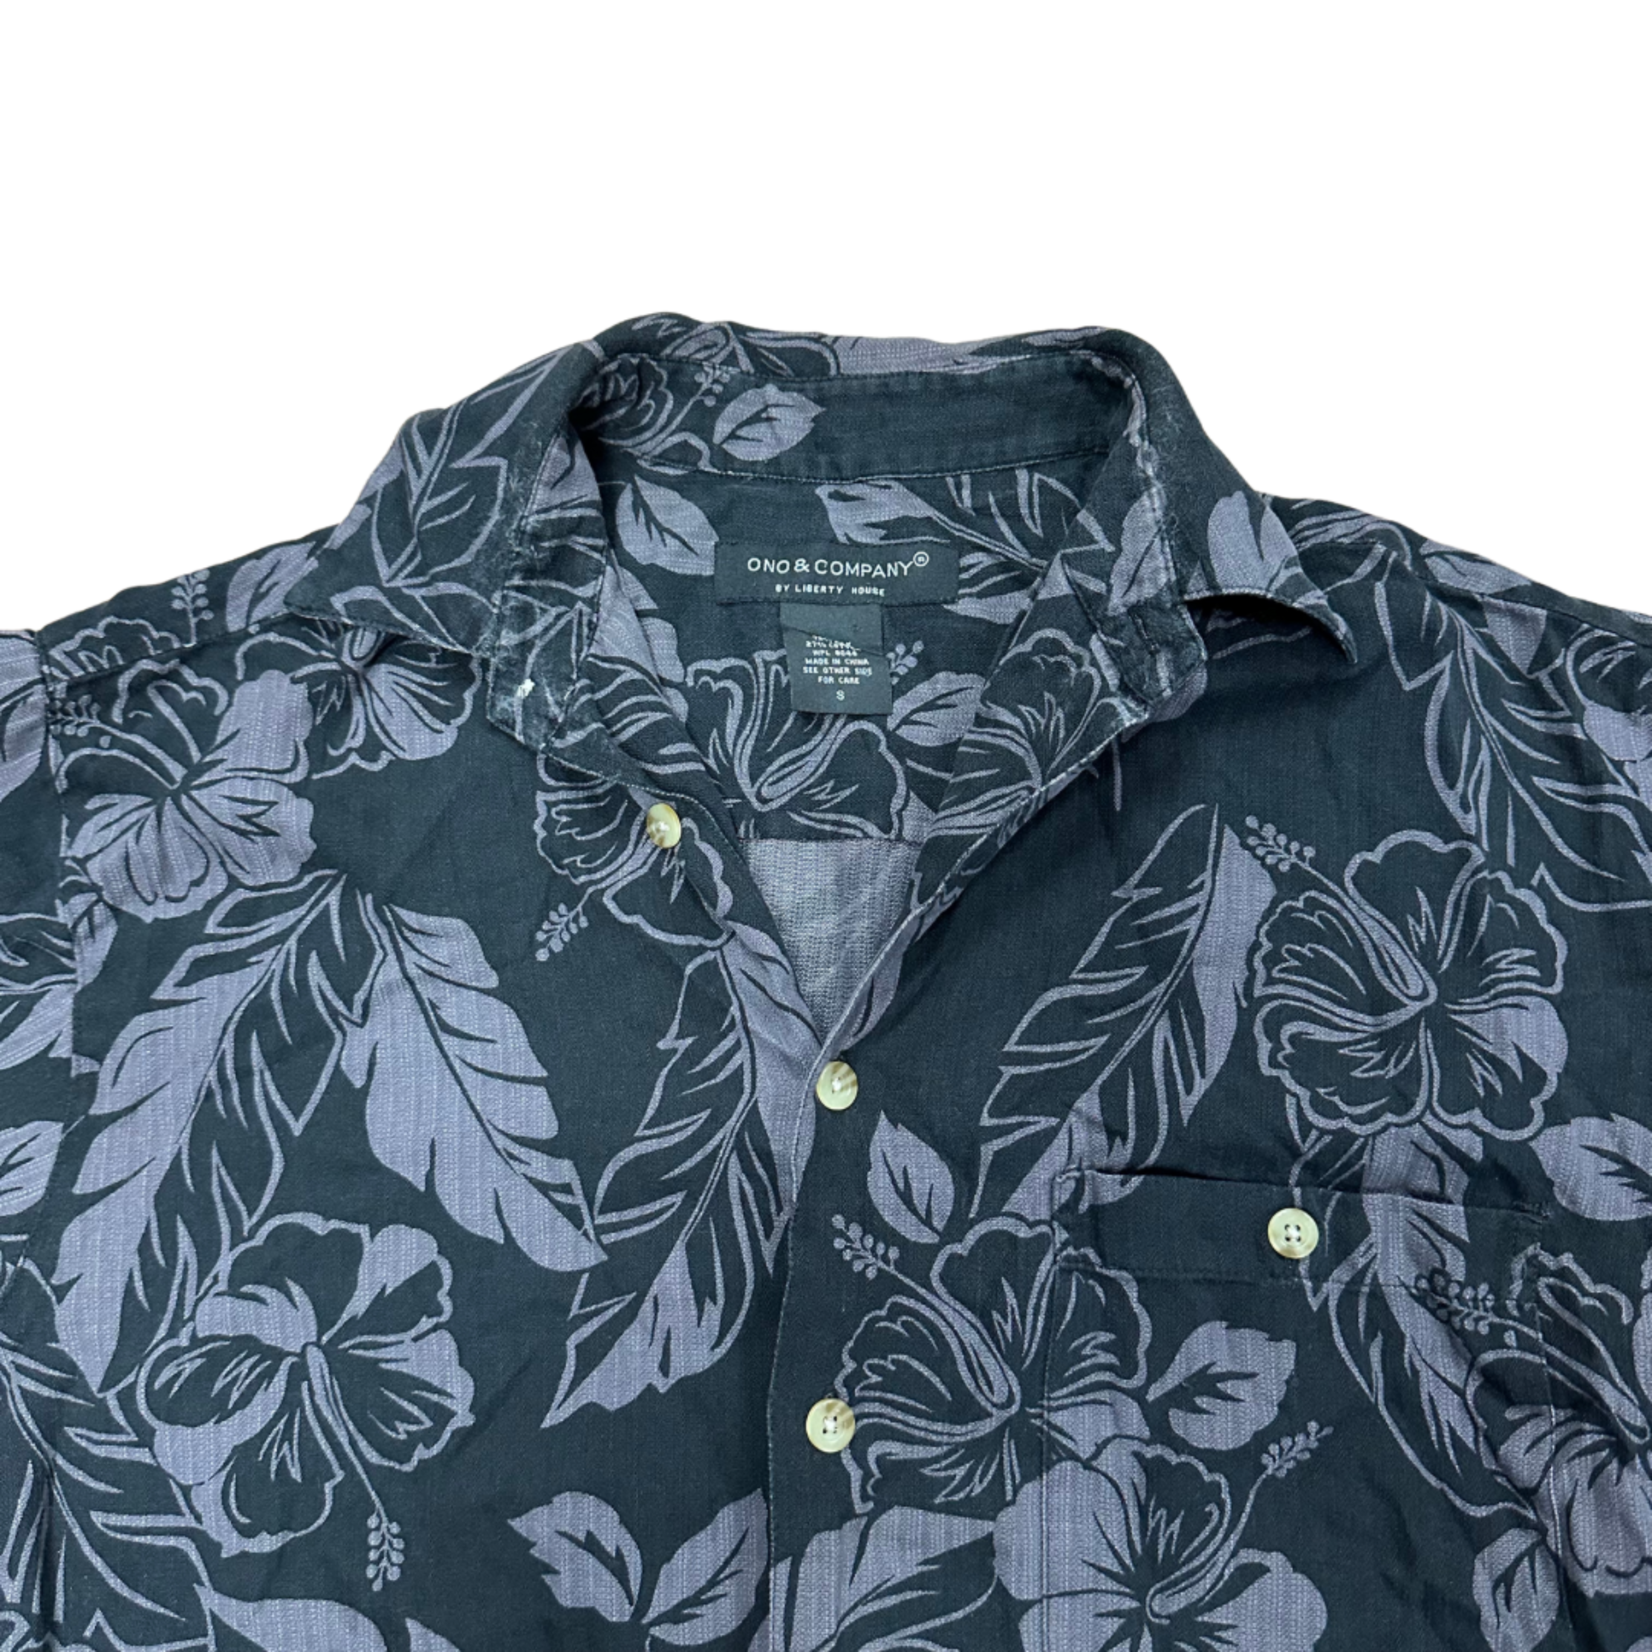 Mission Zero ReLoved Men’s Aloha Shirt - Ono & Co. By Liberty House - 73% Silk Blend Hibiscus Banana Leaf Print - Small